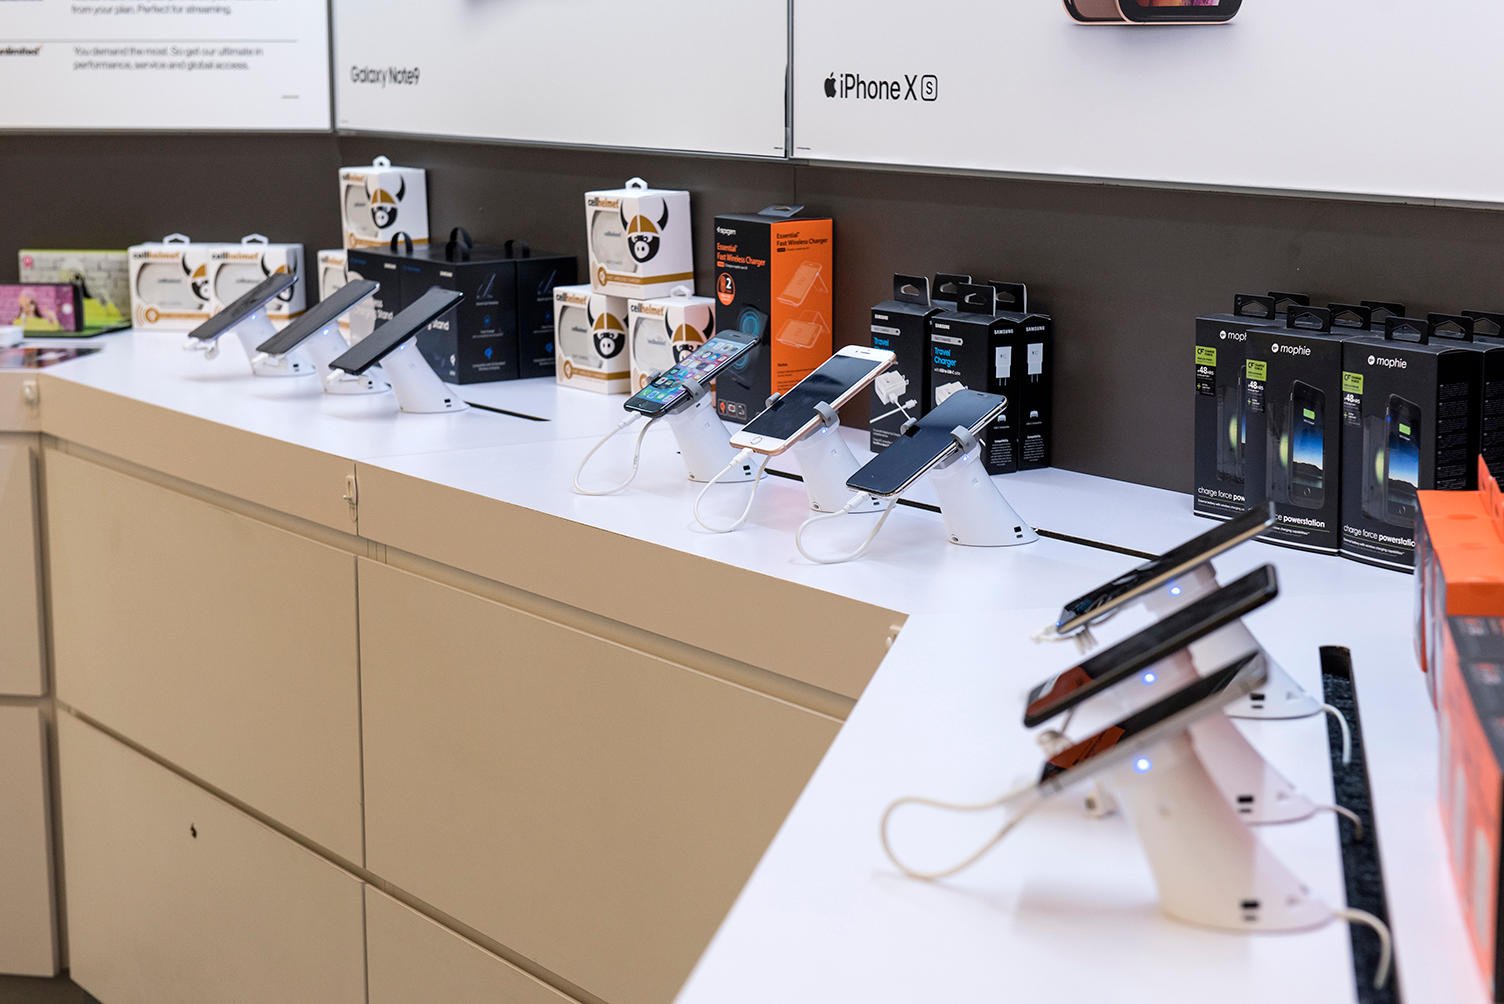 Wireless Zone® of Hooksett is your go-to local retailer for all your Verizon needs.